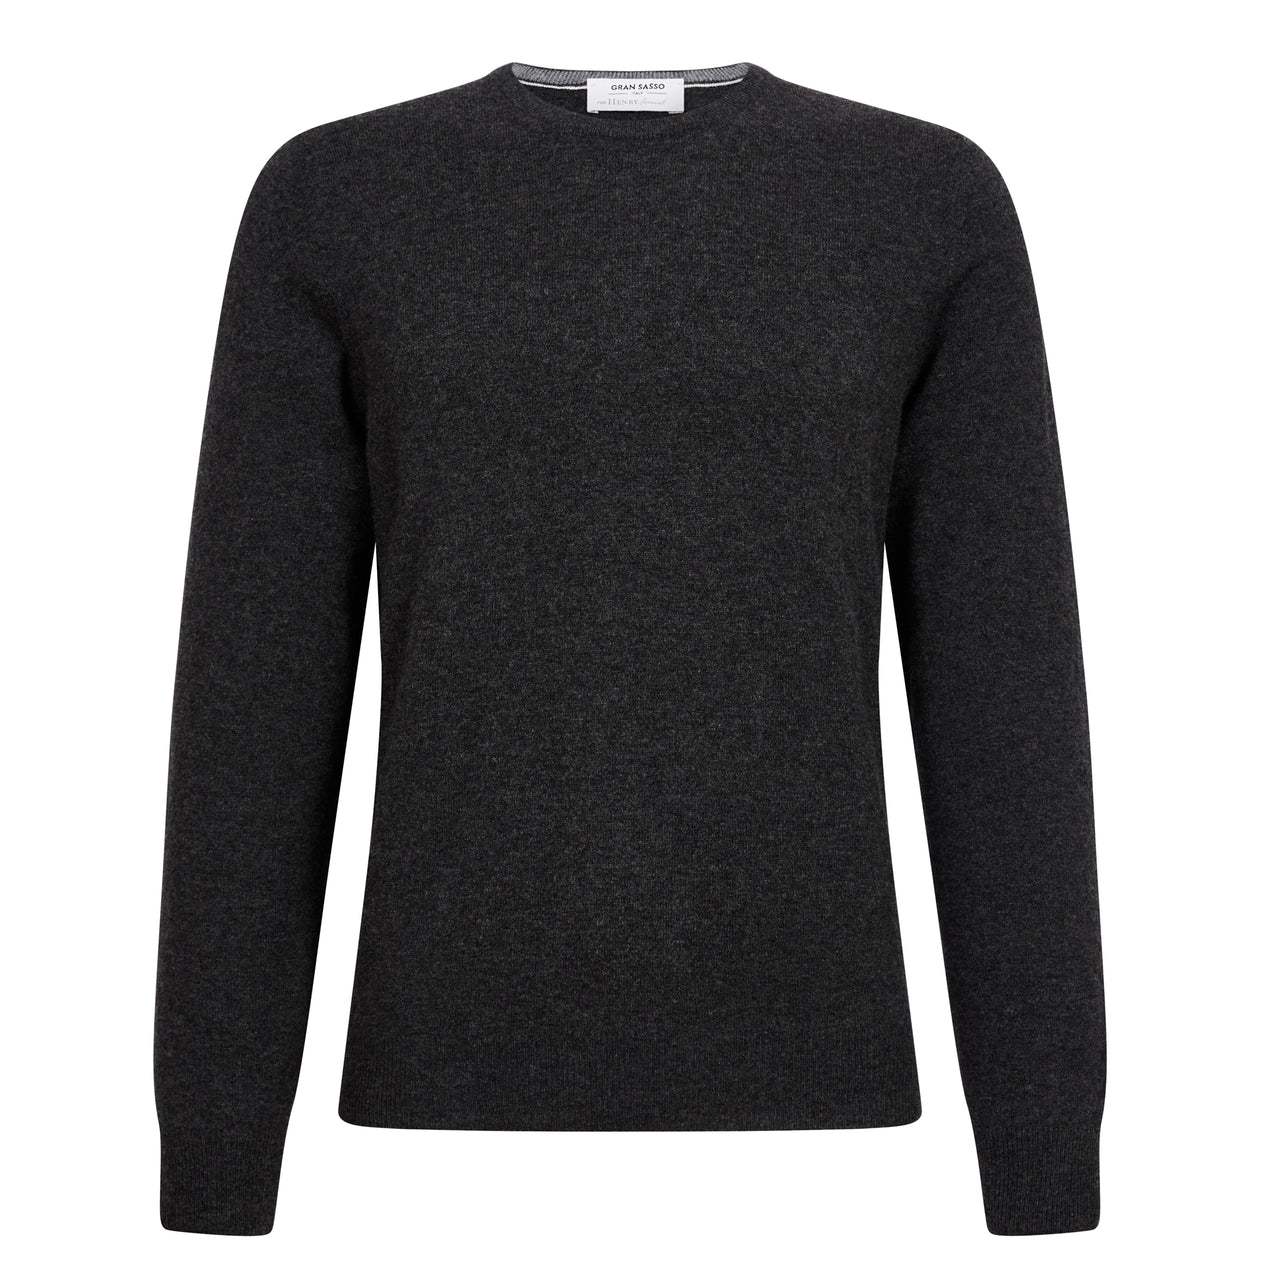 GRAN SASSO Wool/Cashmere Crew Neck Knit CHARCOAL